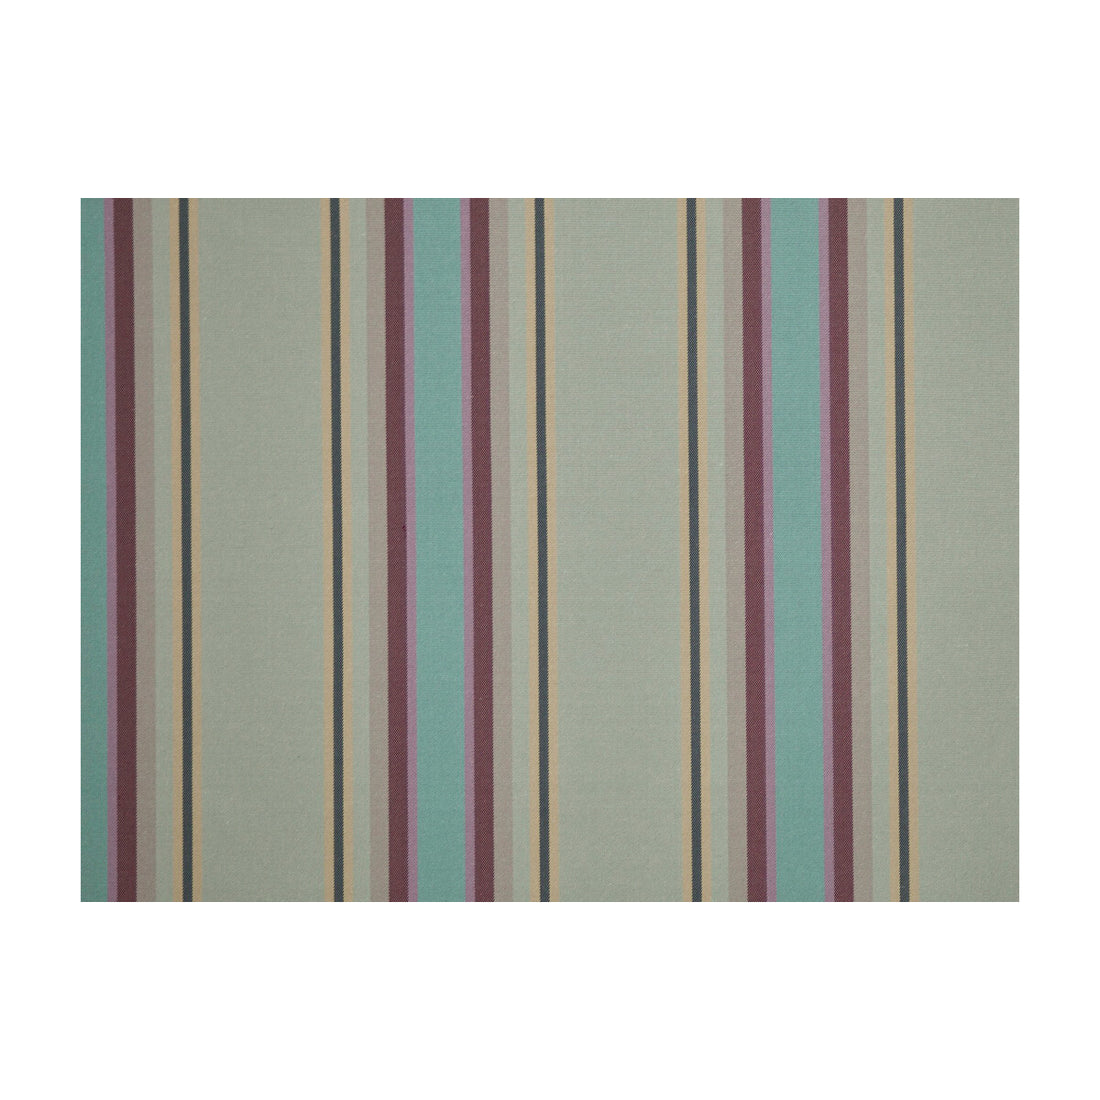 General Stripe fabric in normandy color - pattern JAG-50030.3911.0 - by Brunschwig &amp; Fils in the Jagtar collection